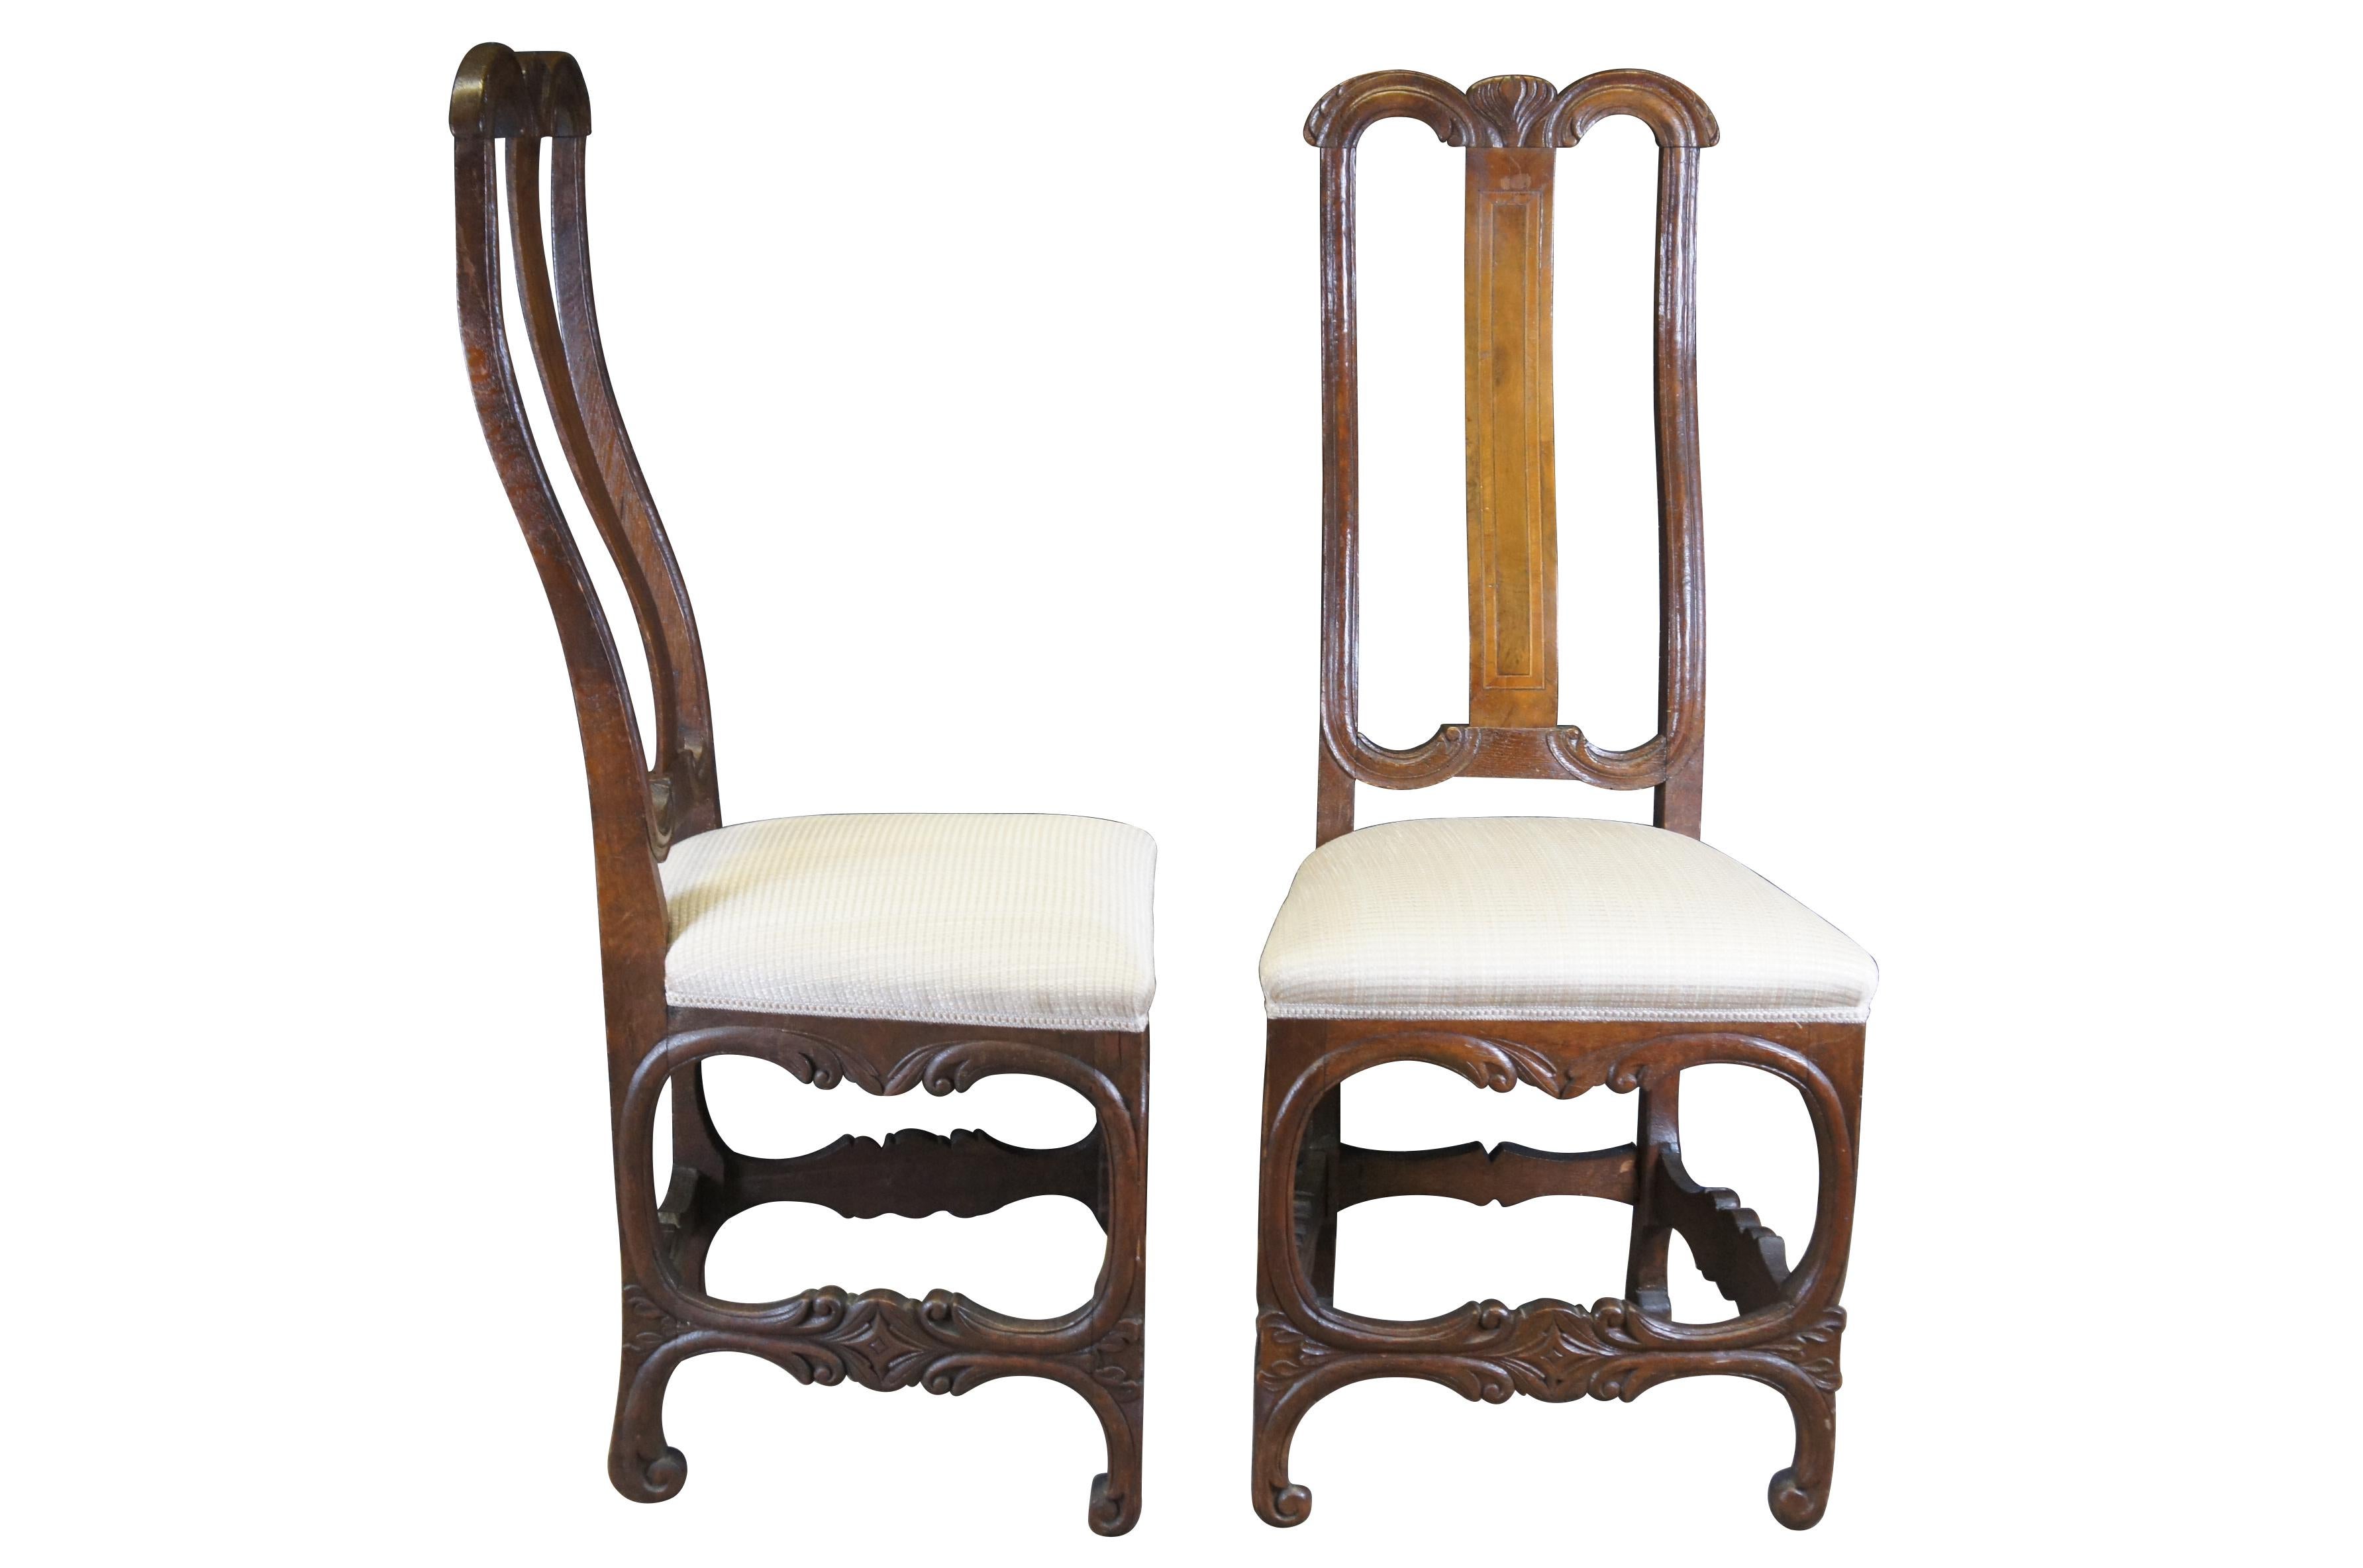 Two antique 19th century German dining side chairs.  Made of mahogany featuring baroque form with inlaid accents and unique serpentine carved stretchers.  Shipping label on bottom reads Heinrich Klingenberg, Hamburg Germany.

Heinrich Klingenberg